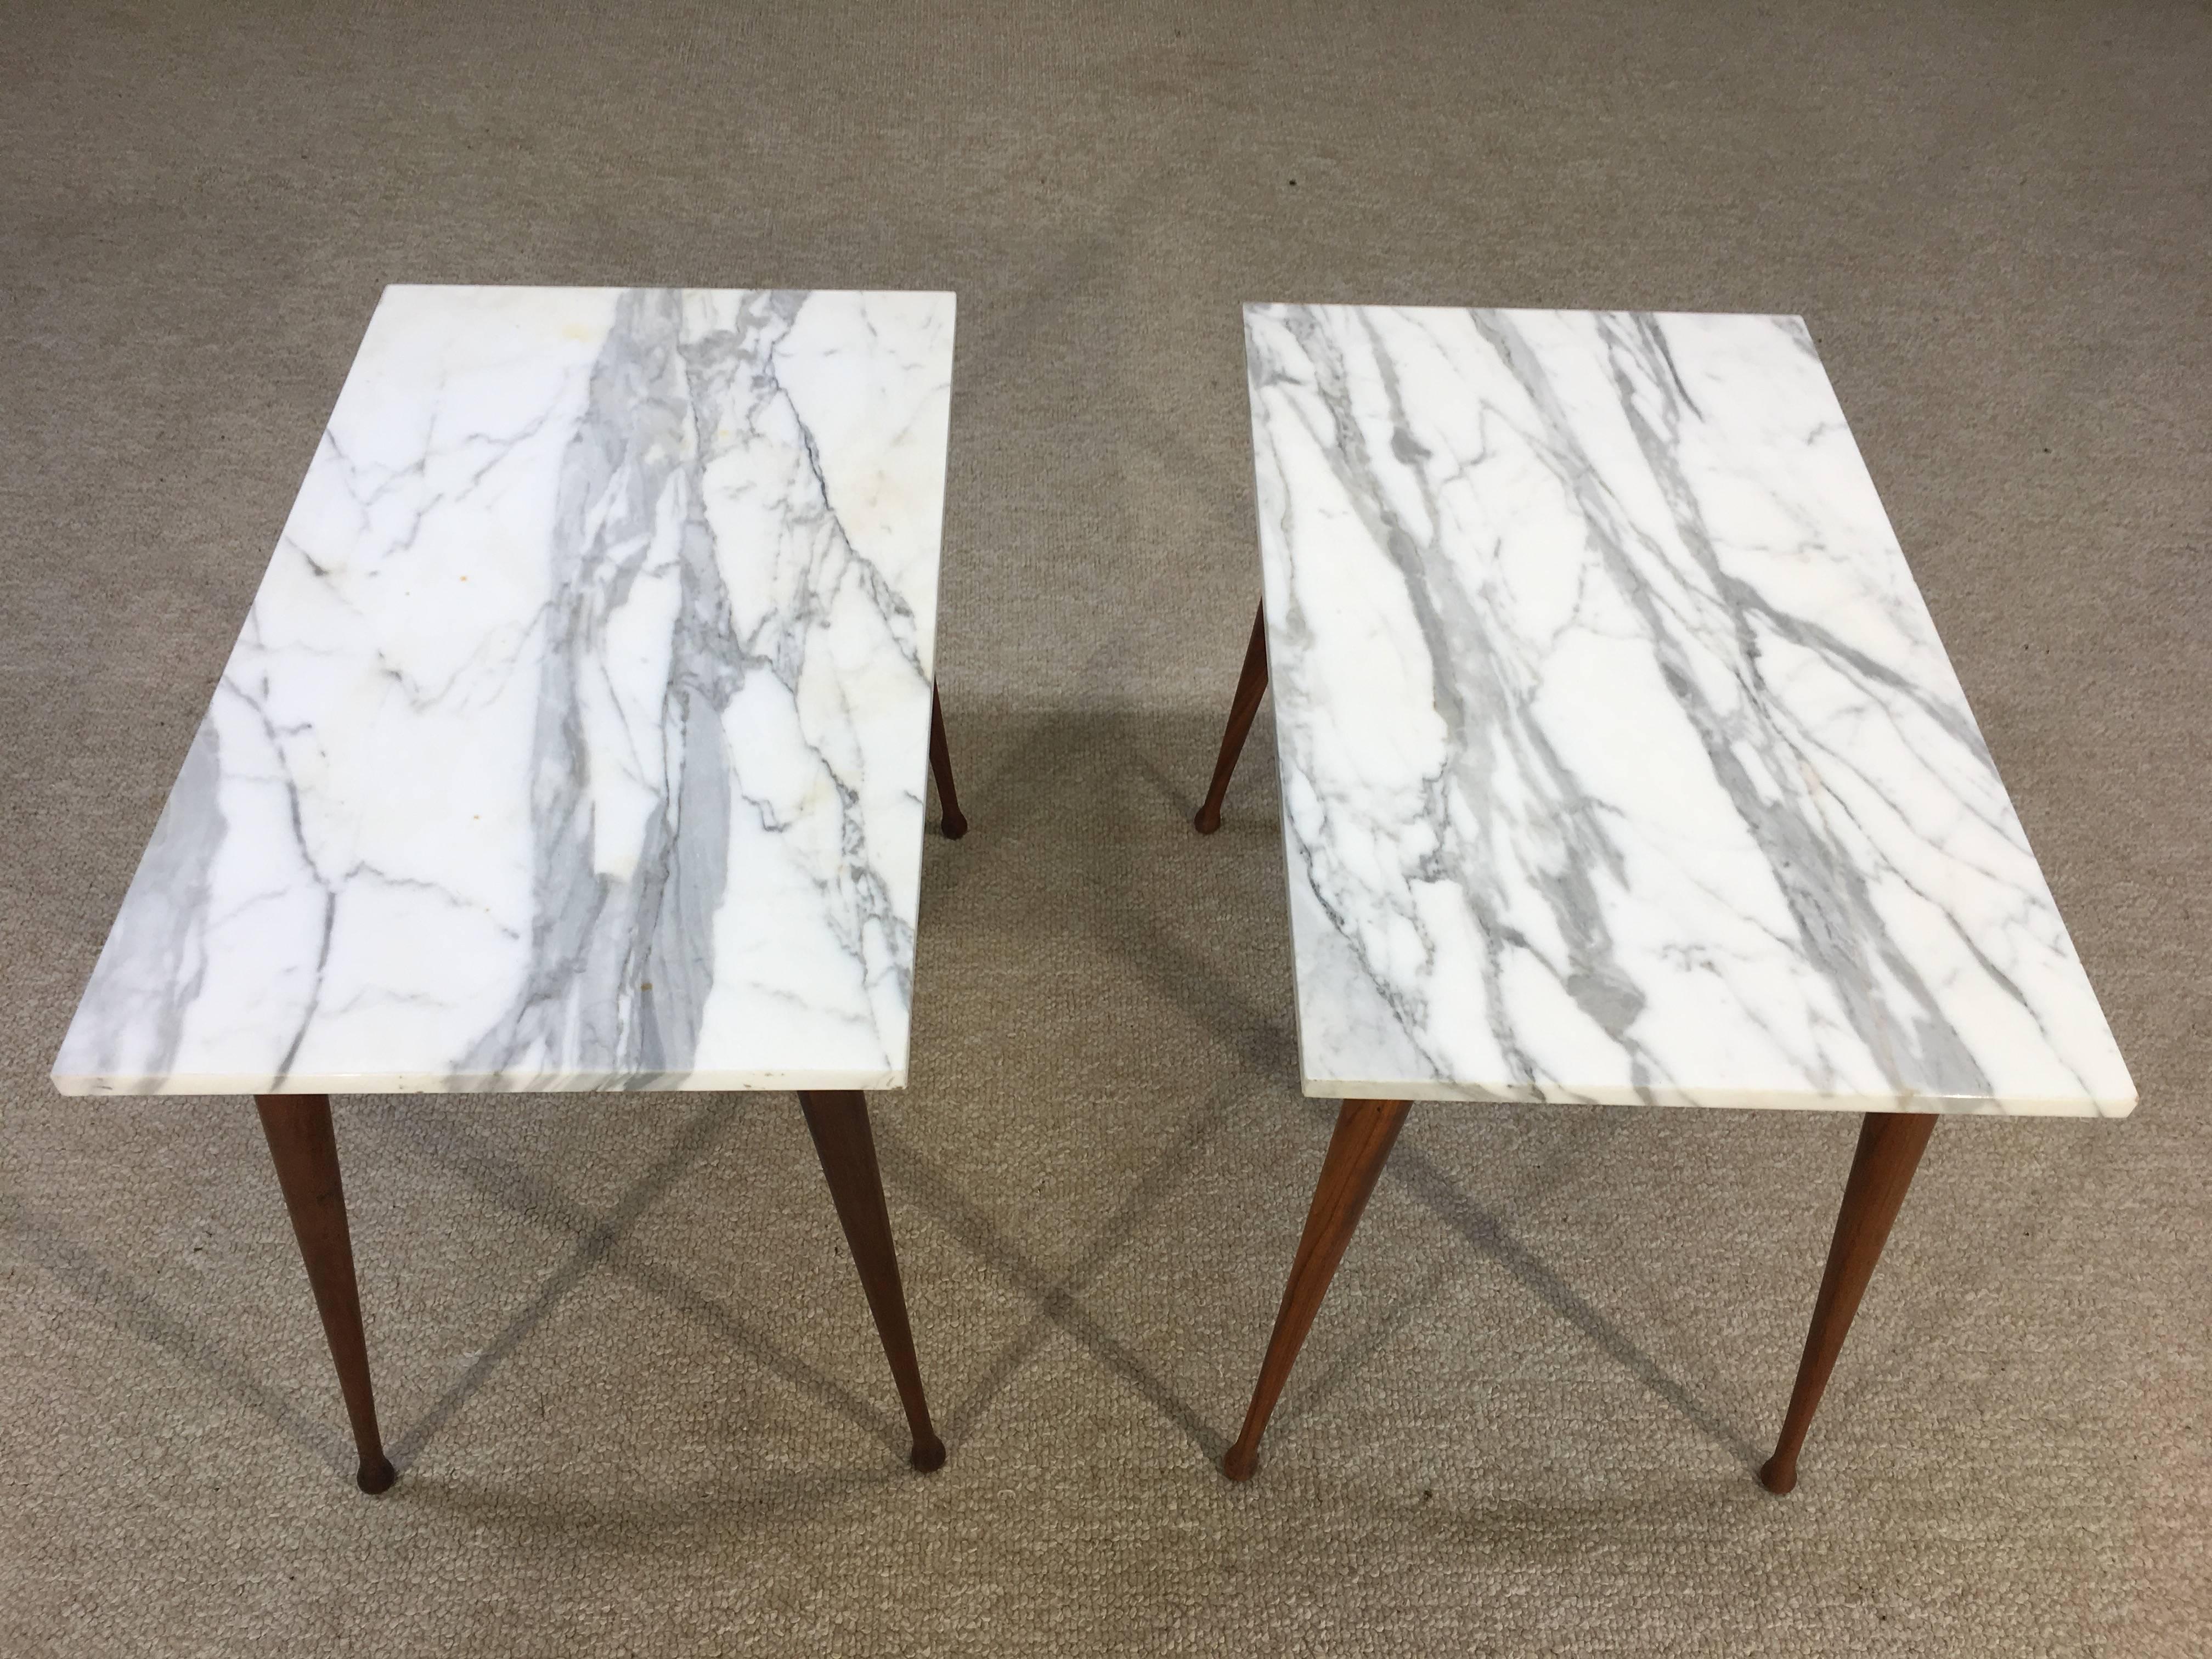 A beautiful matched pair of Paul Mccobb Carrara marble-top side tables having steel under frame and splayed birch drumstick legs, circa 1955.